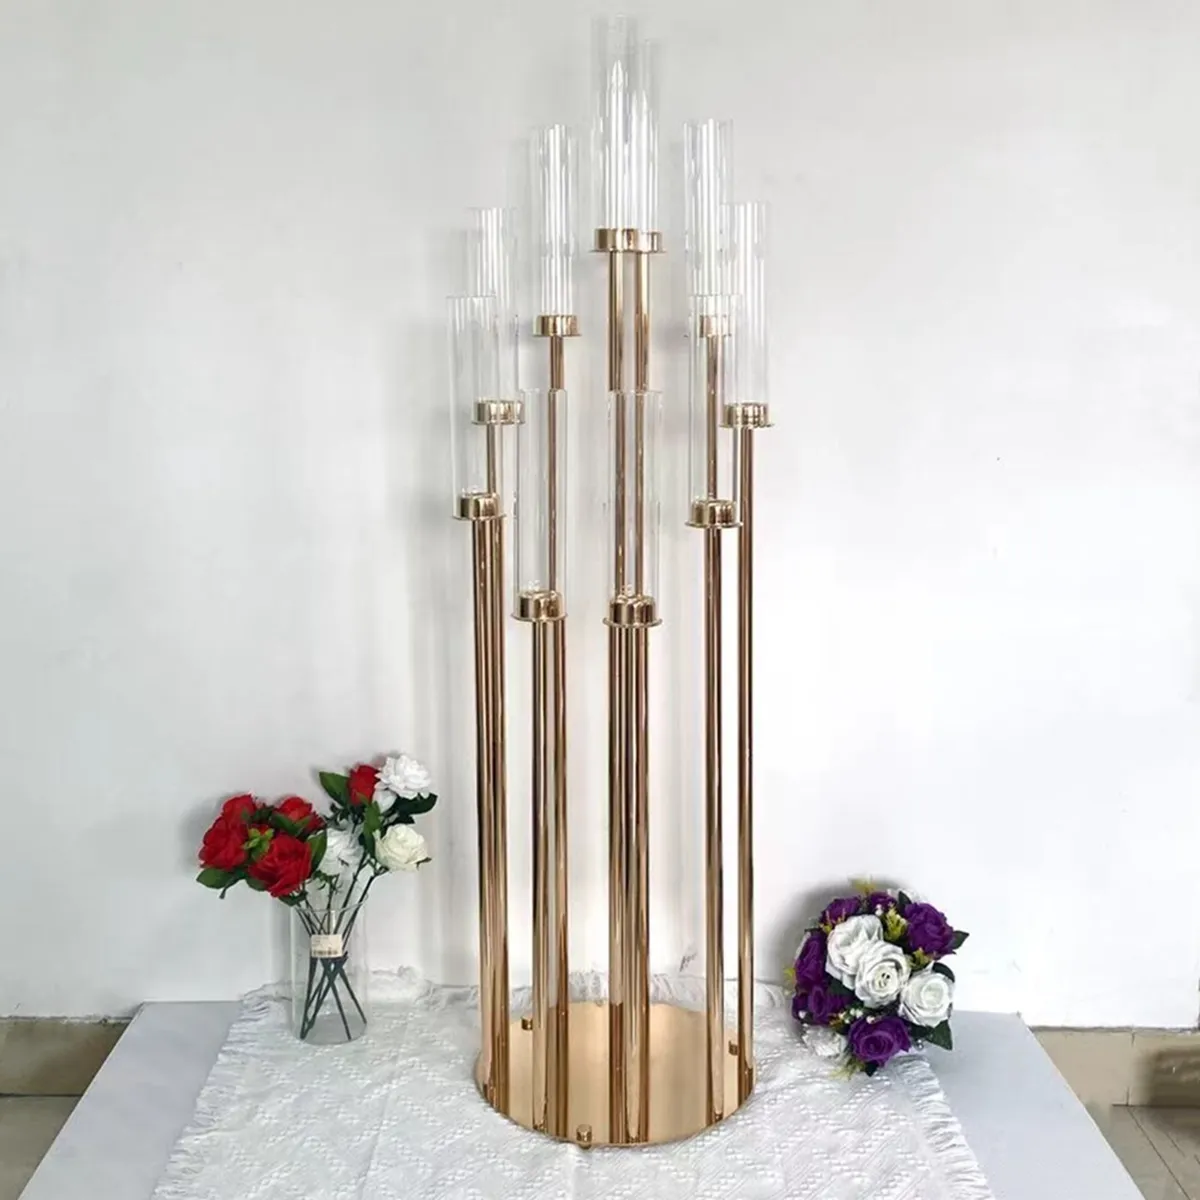 decoration 10 Heads Metal Candelabra Luxury Candle Holders Stands Wedding Table Centerpieces Flower Vases Road Lead Party Decoration imake316